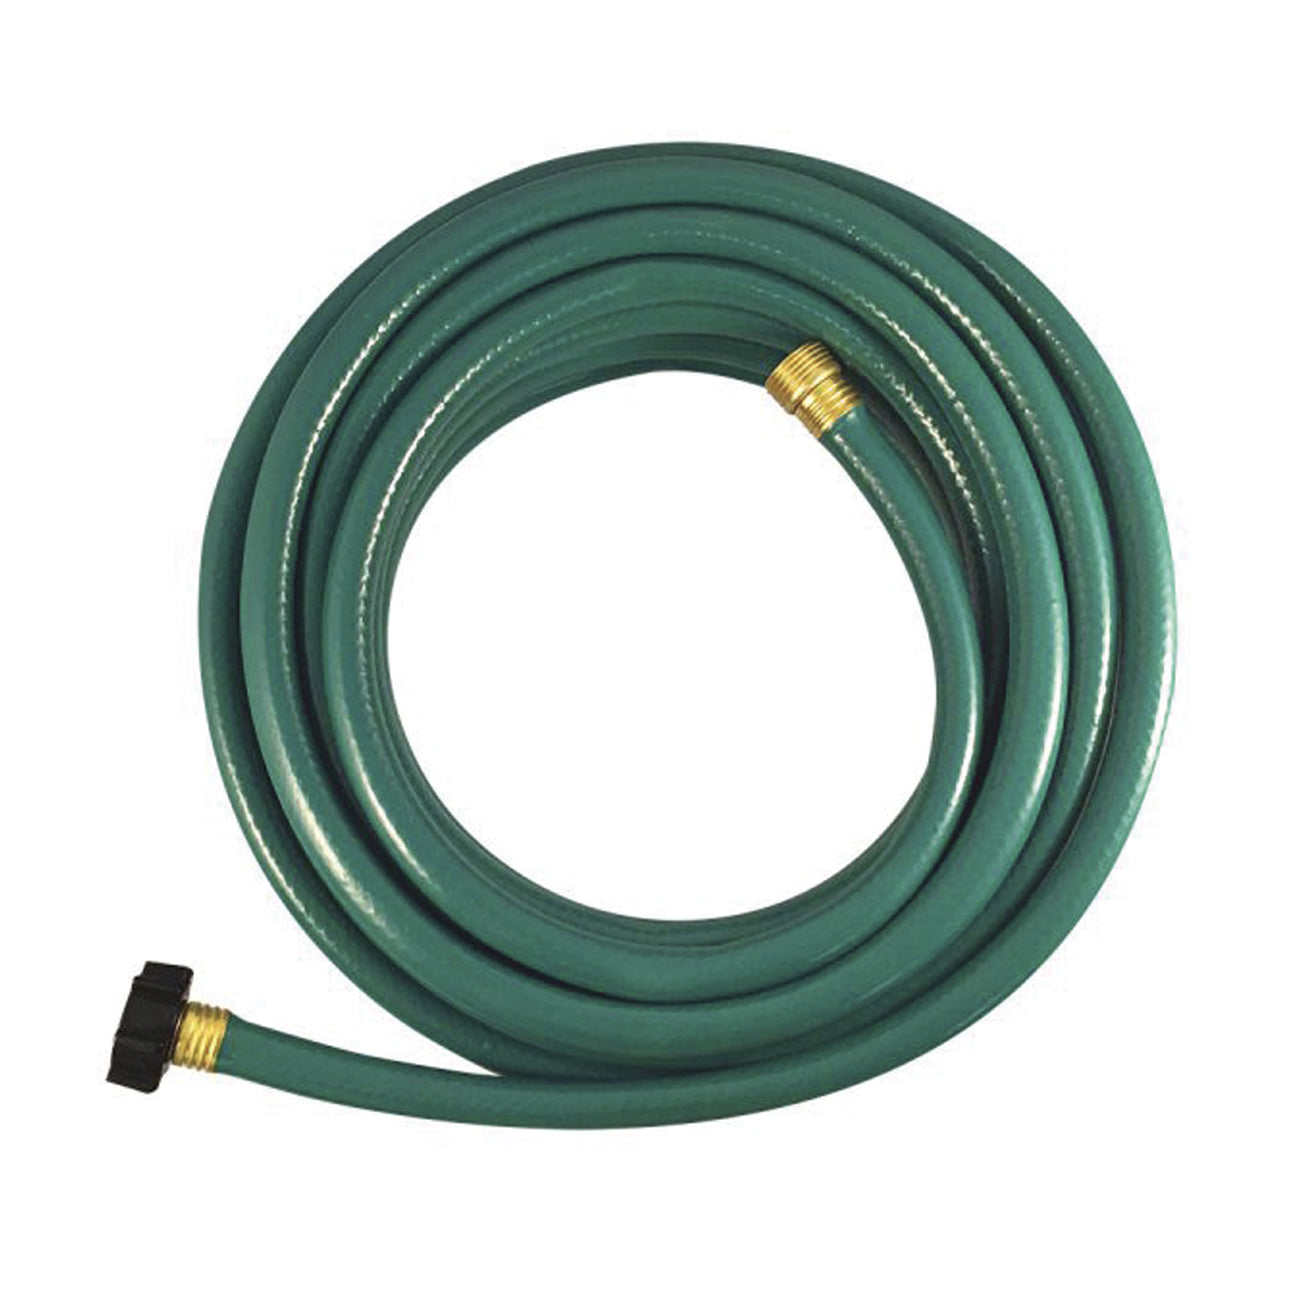 Water Hose 3 Ply 5/8" x 100'